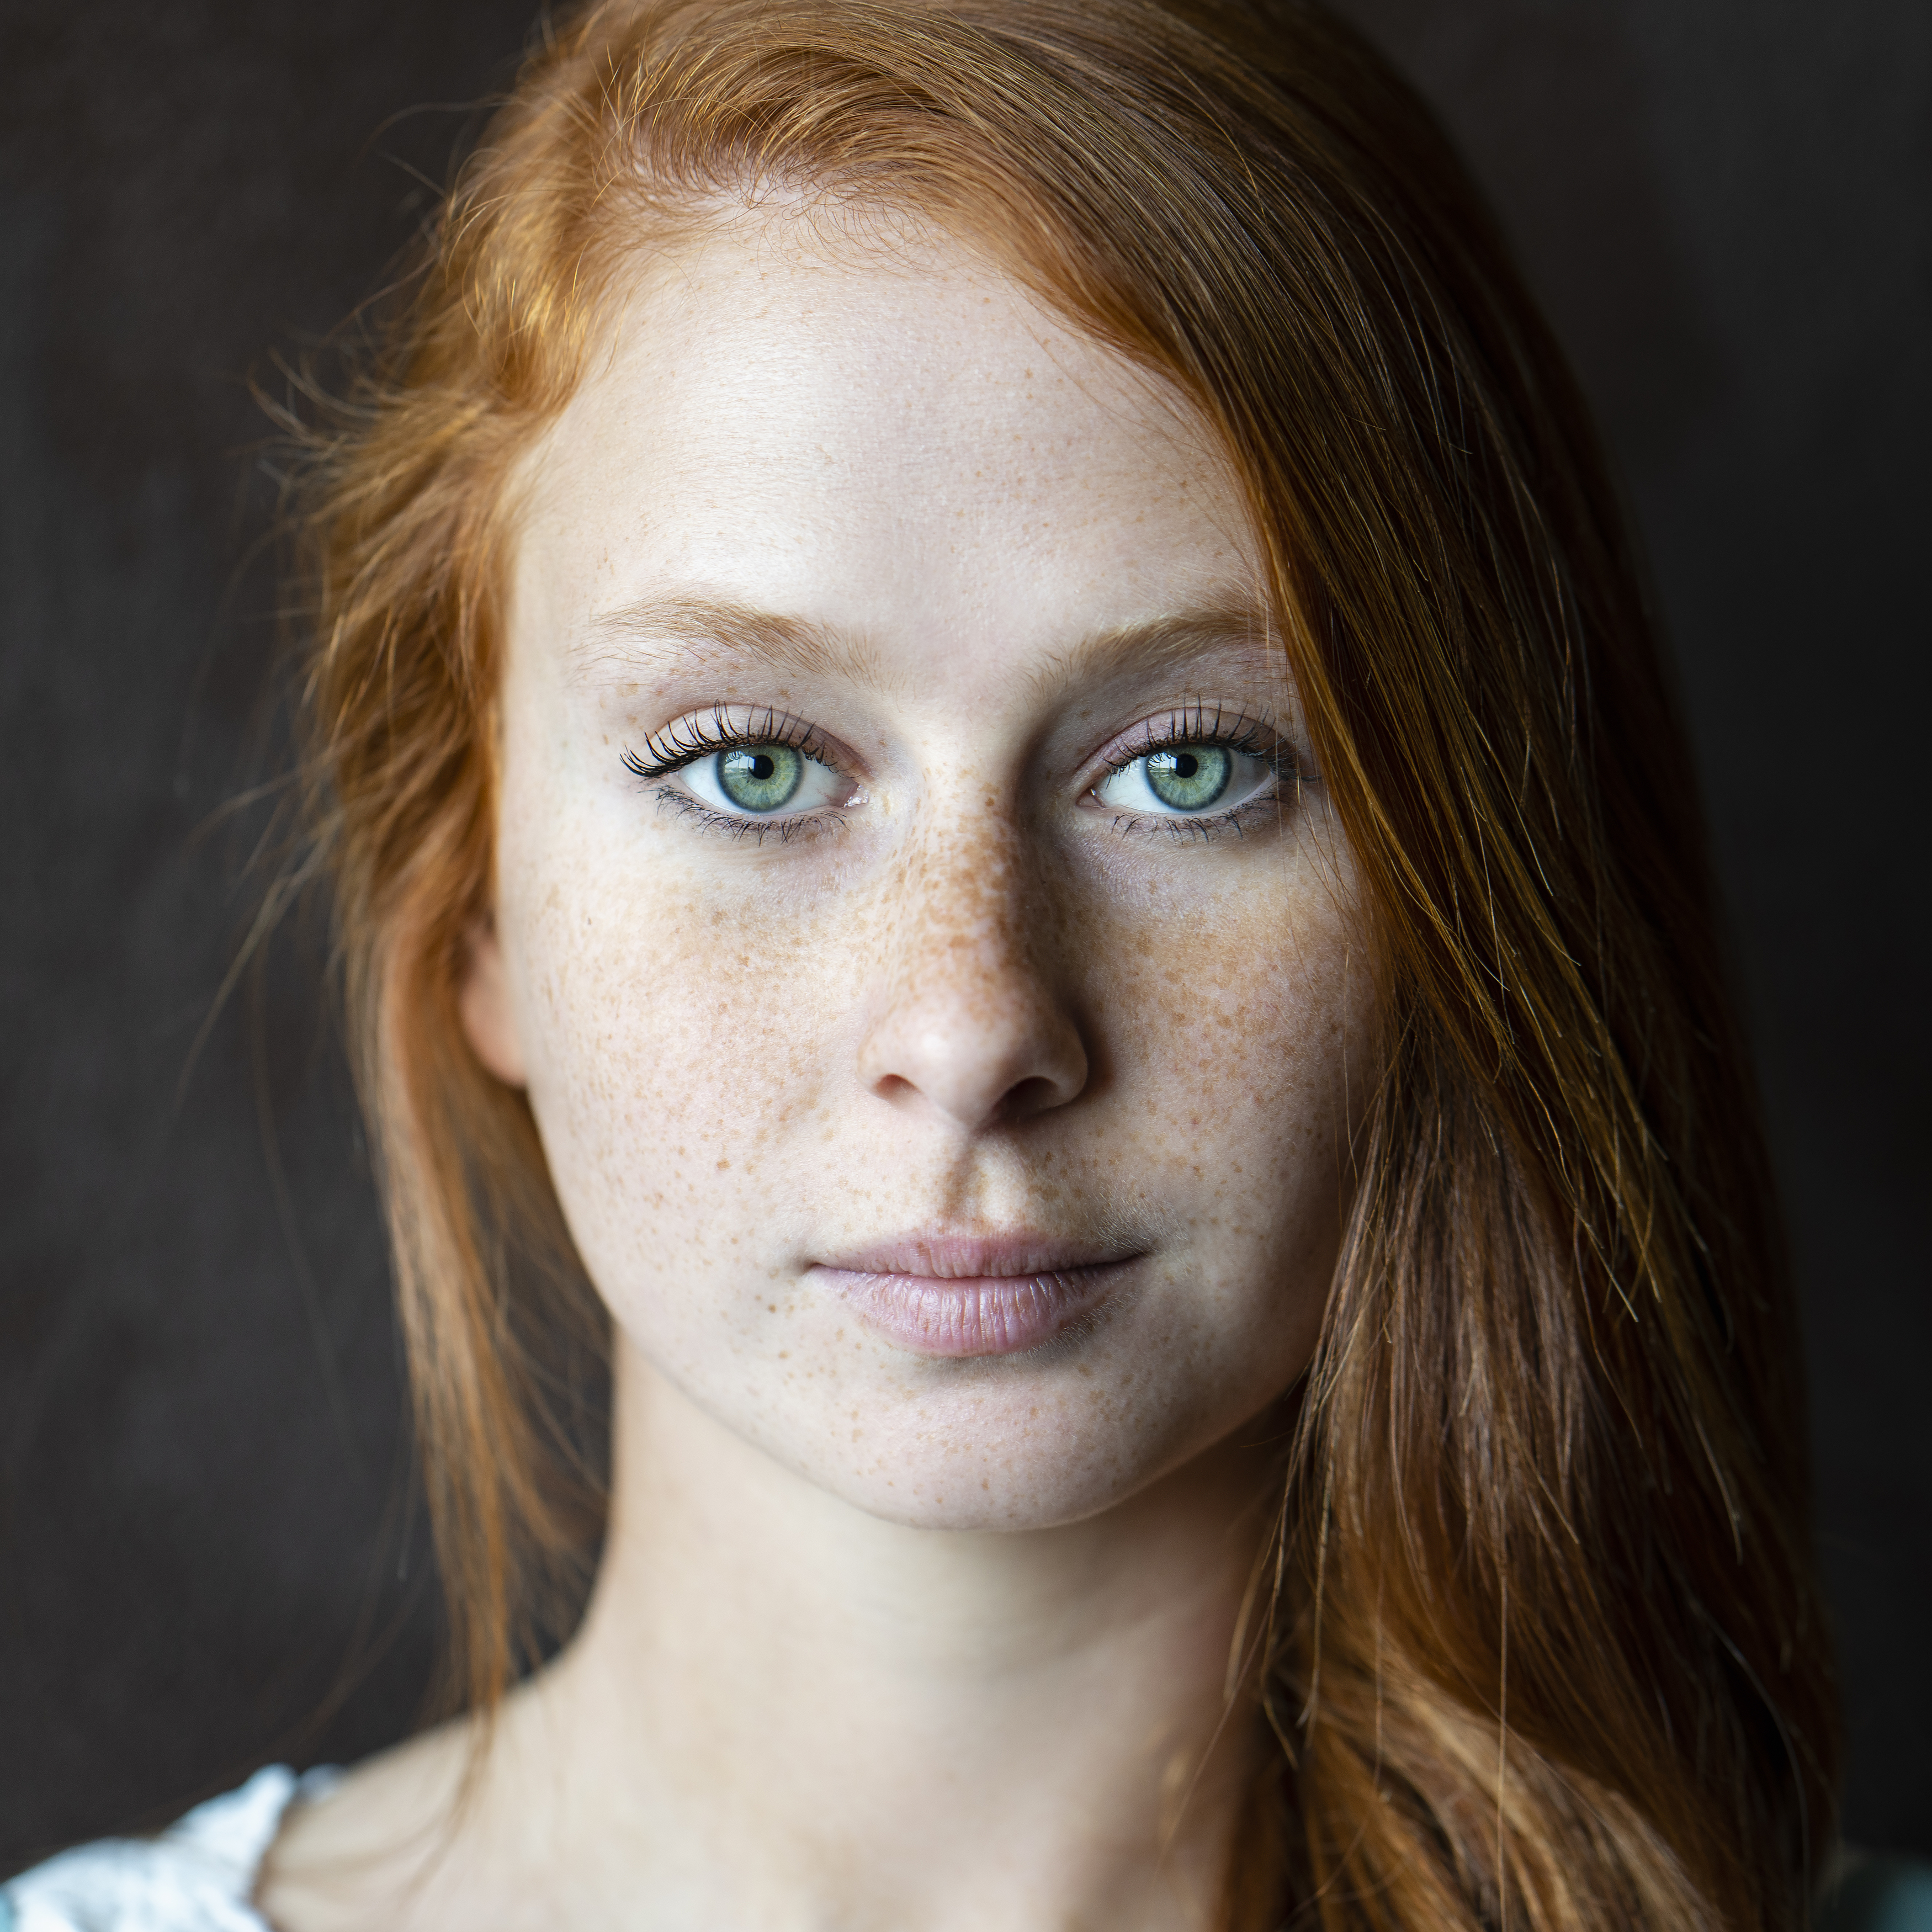 attractive, beautiful woman, beauty, close-up, eyes, female, freckles face, front view, girl, hair, headshot, human face, individuality, indoors, lips, looking at camera, one person, portrait, redhead, studio shot, young women, Alex Tsarfin